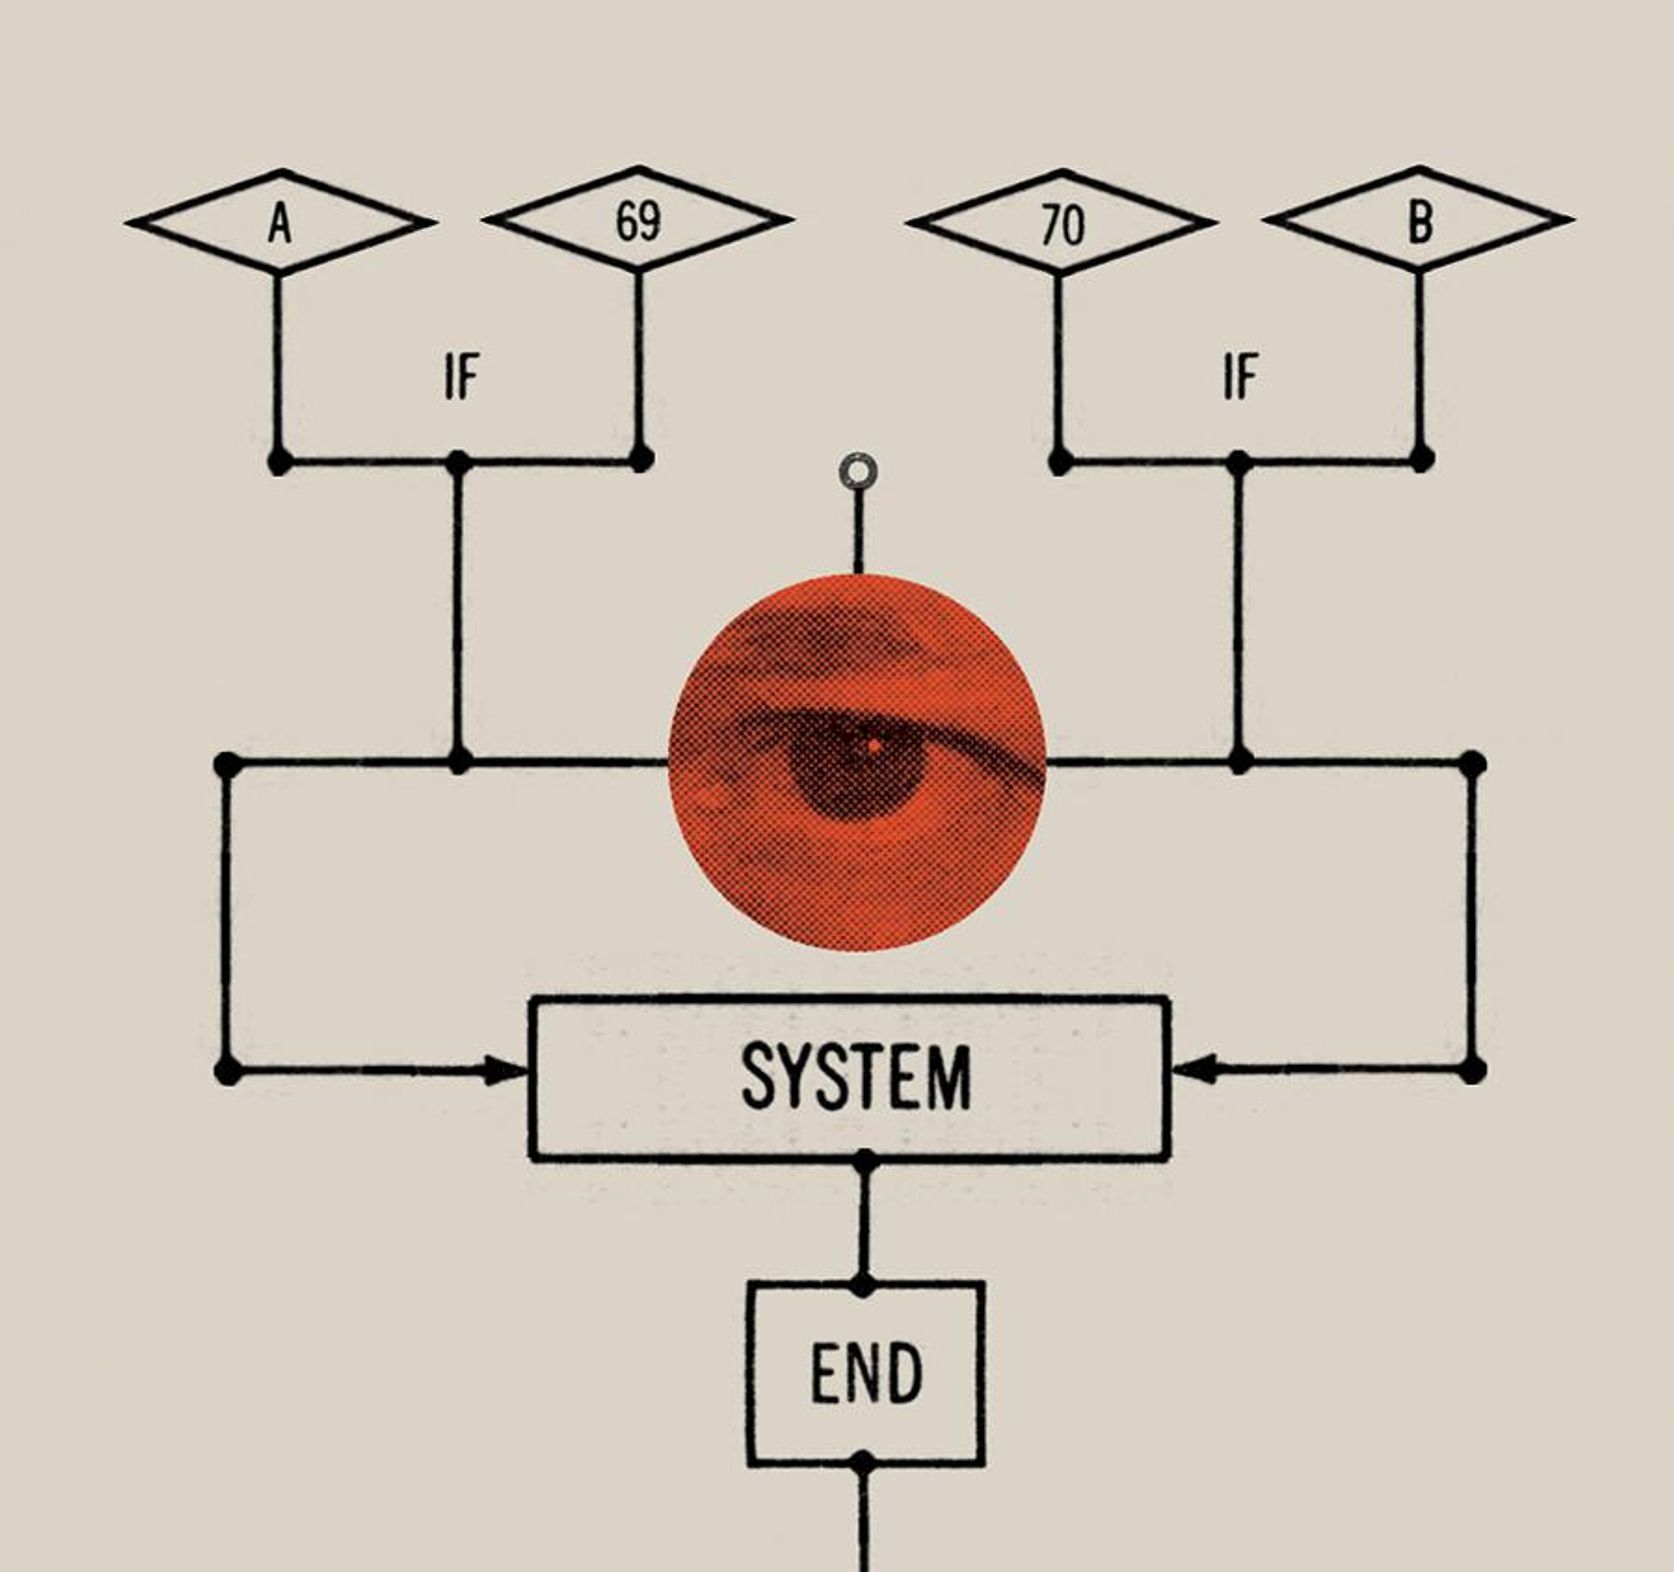 Mock flowchart, centered around close-up image of an eye, surrounding an absurdist logic tree with boxes and arrows and concluding with two squares reading \u201cSYSTEM\u201d and \u201cEND"